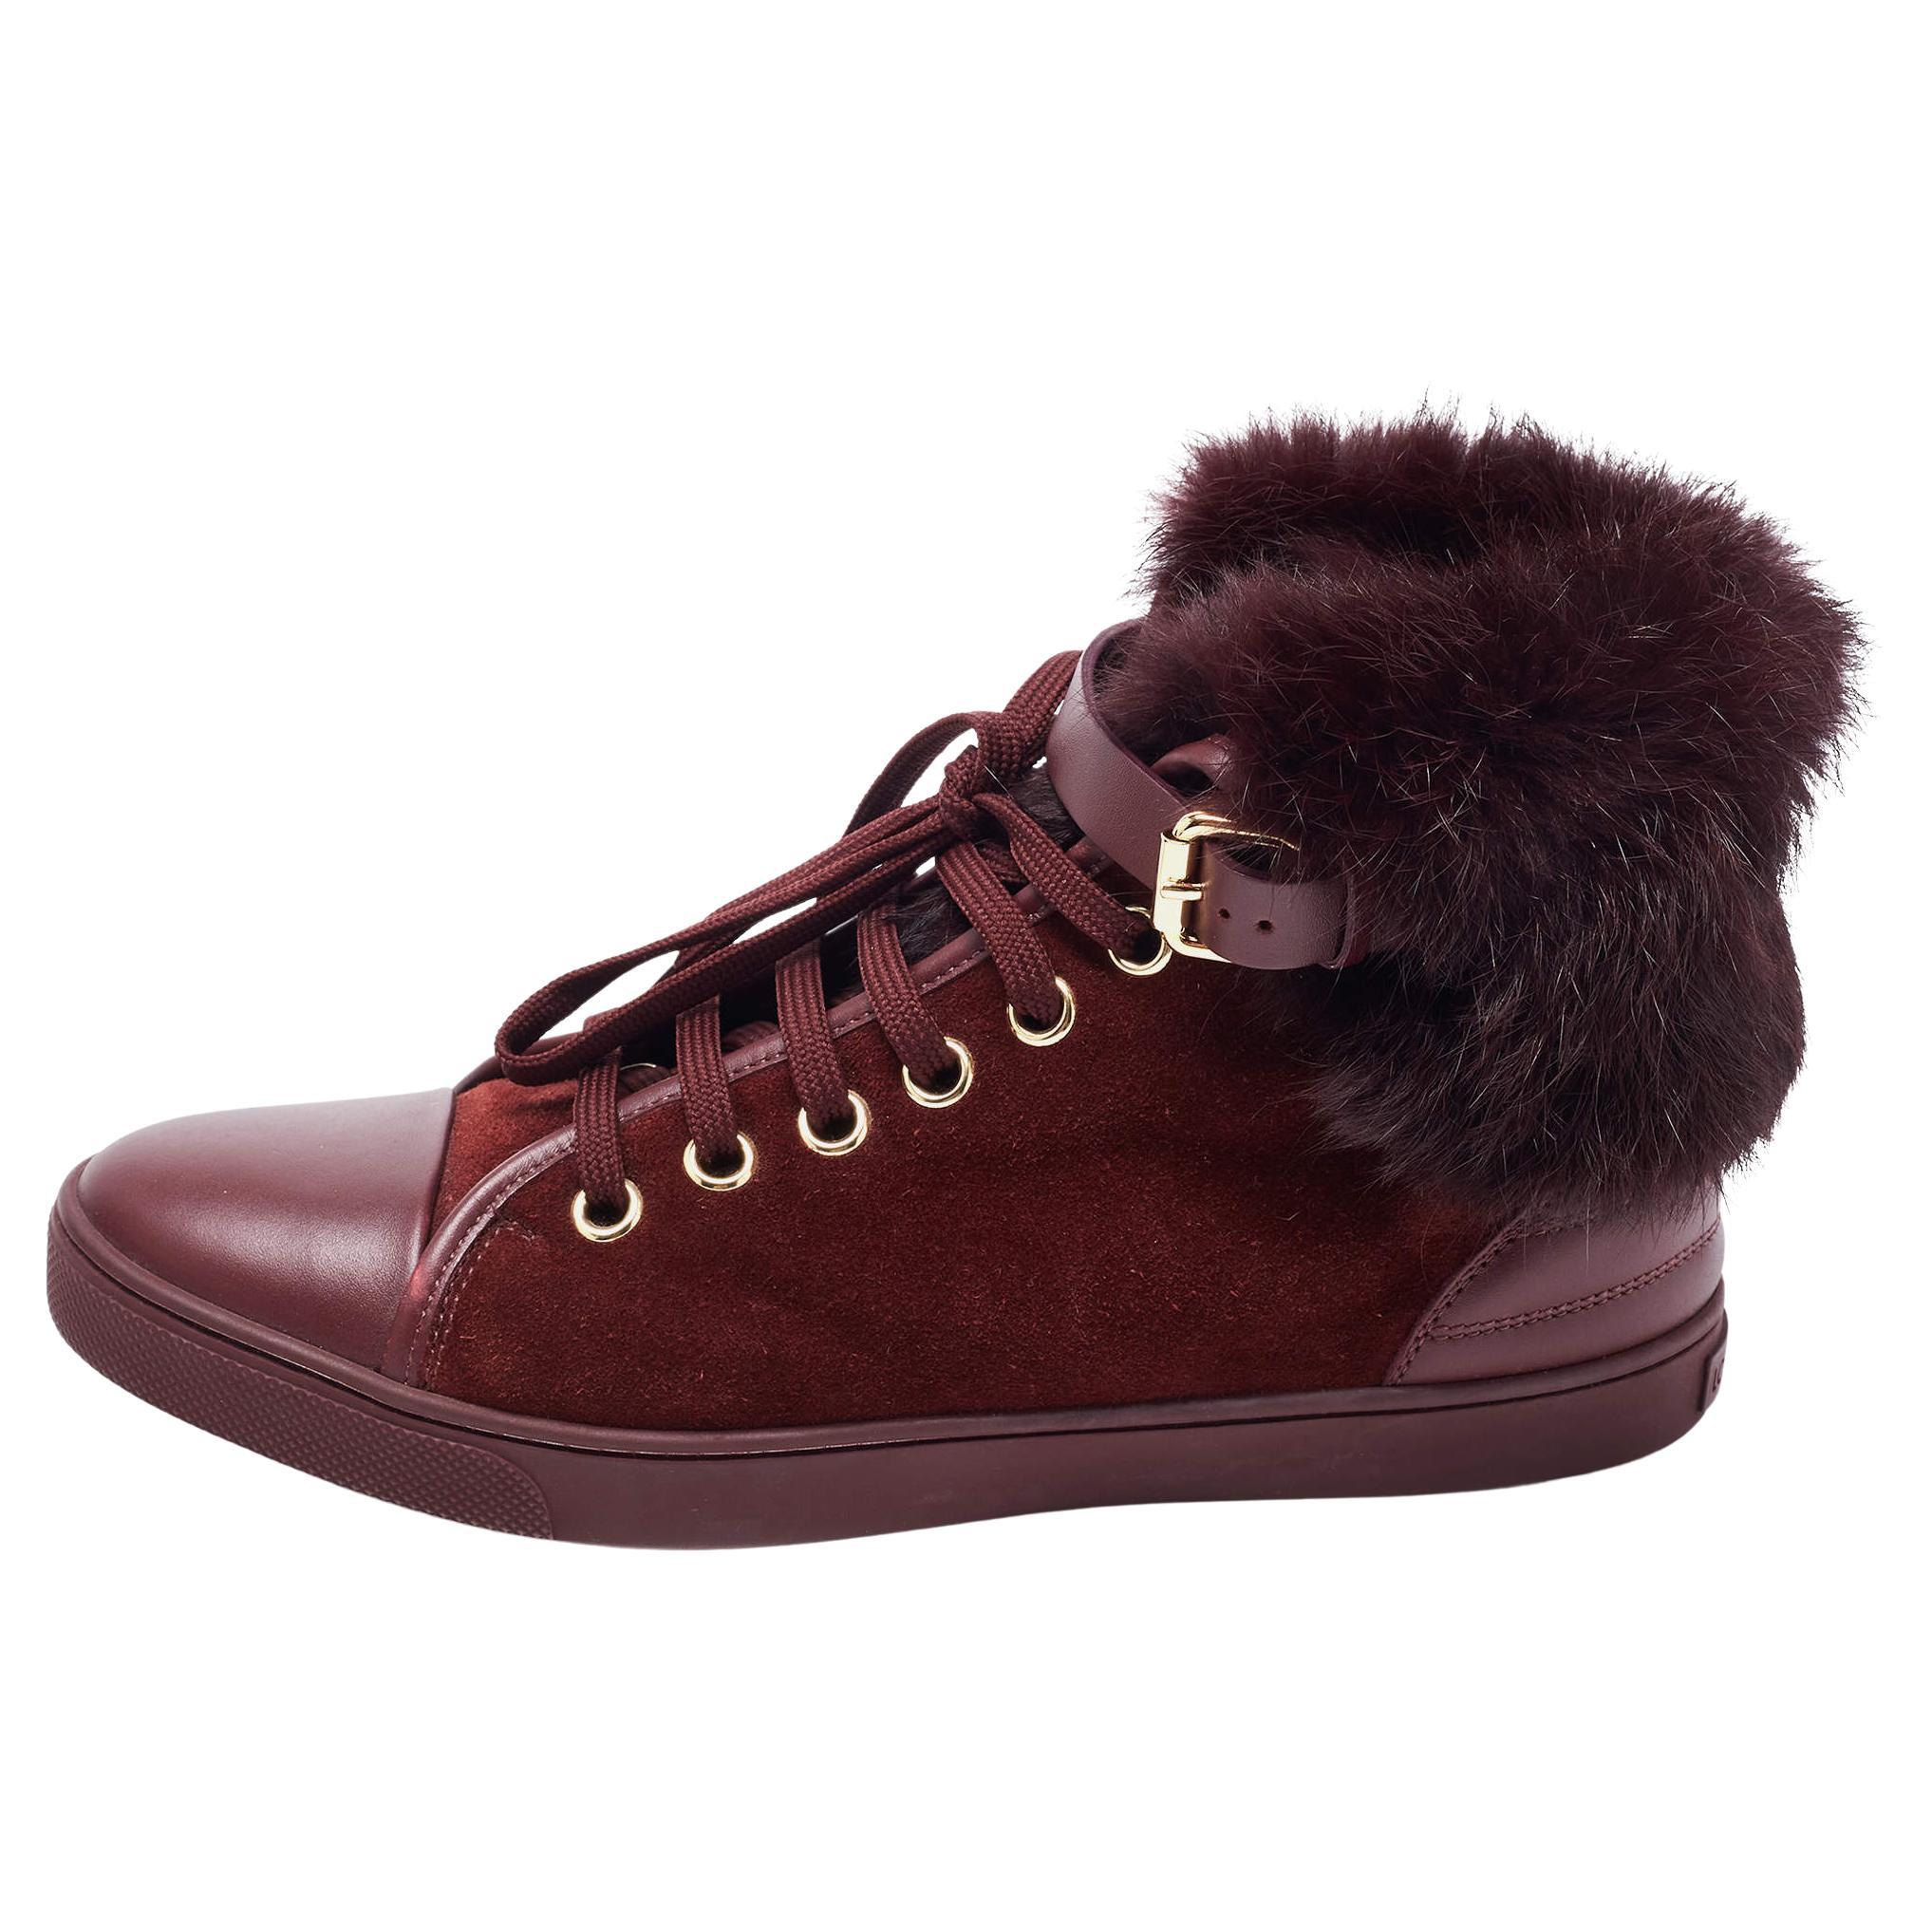 Louis Vuitton Burgundy Suede, Leather and Fur High Top Sneakers Size 38.5